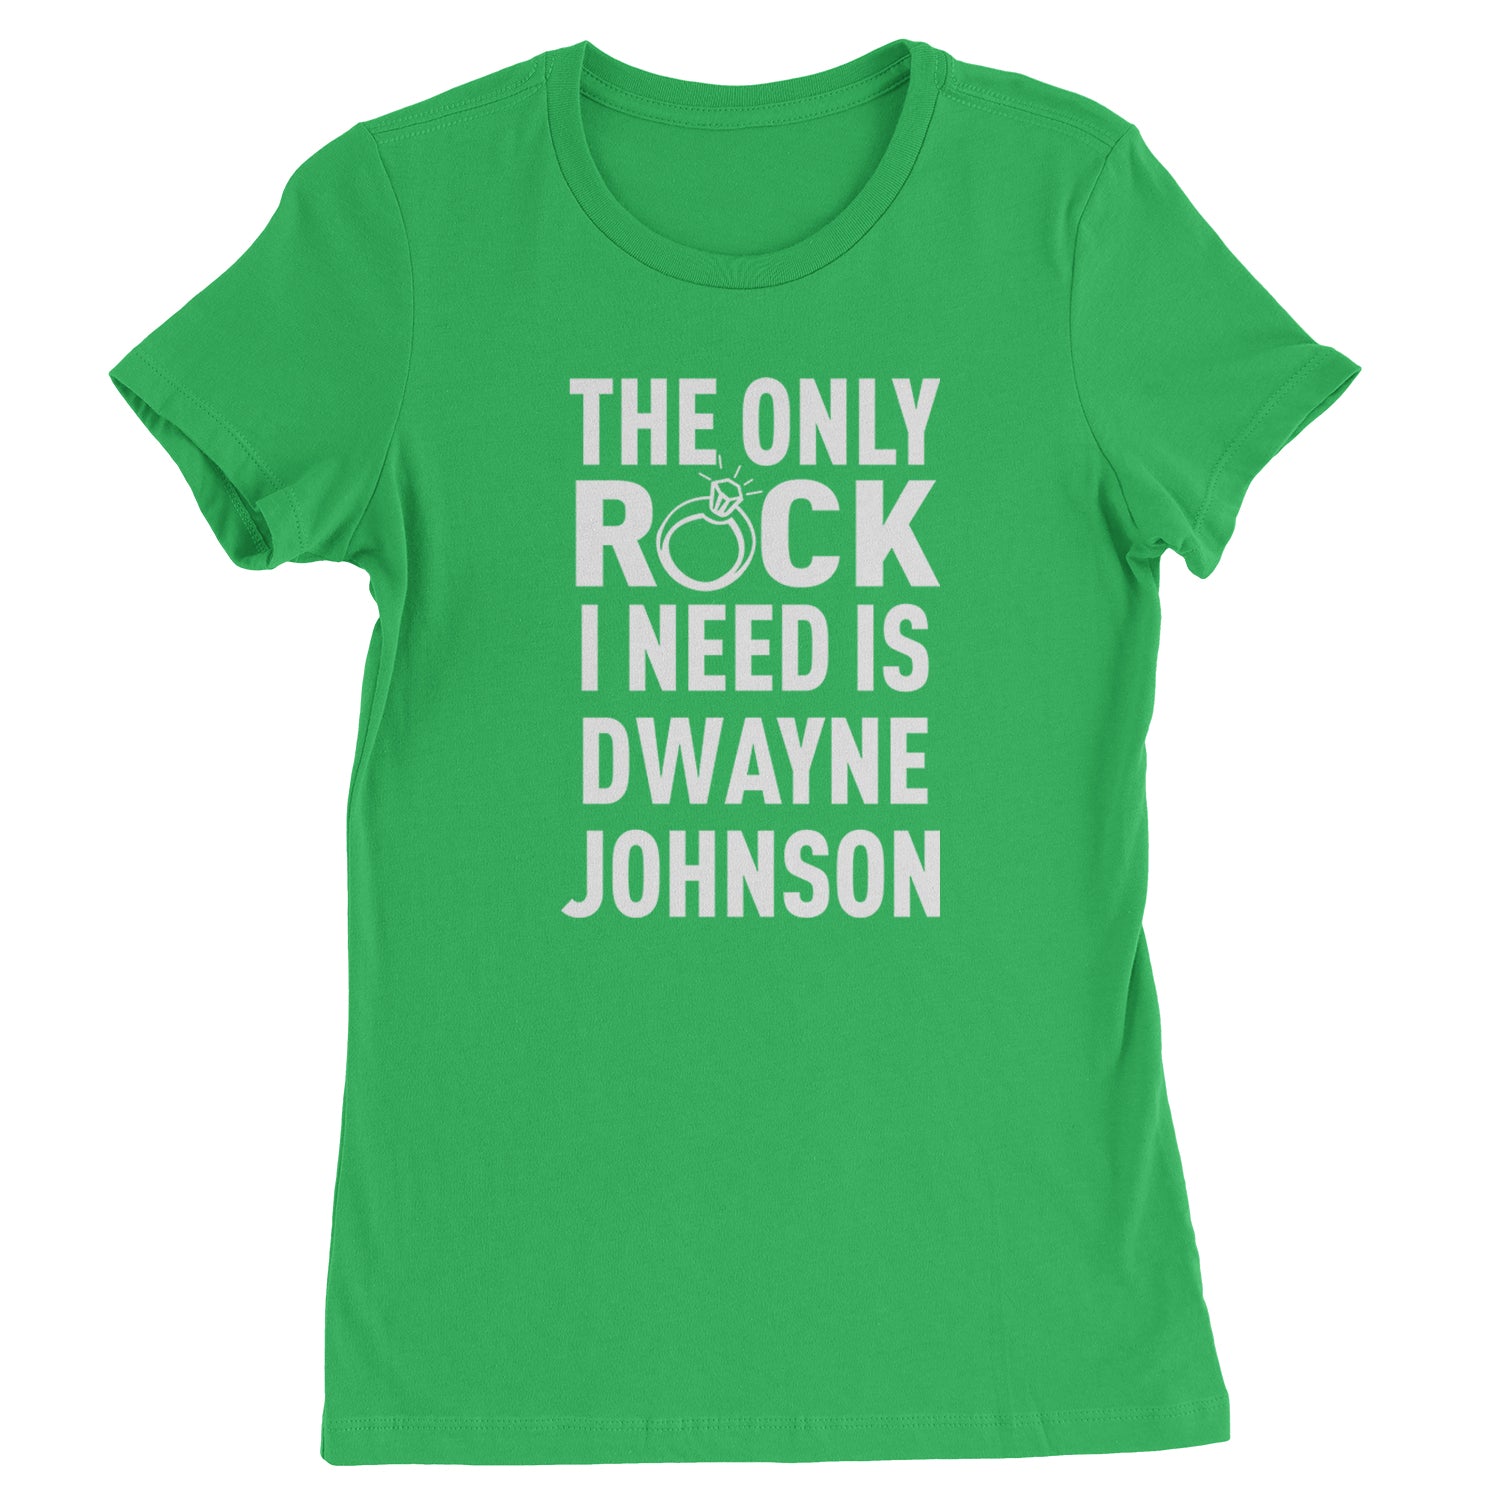 The Only Rock I Need Is Dwayne Johnson Womens T-shirt dwayne, johnson, marry, me, ring, rock, the, wedding by Expression Tees